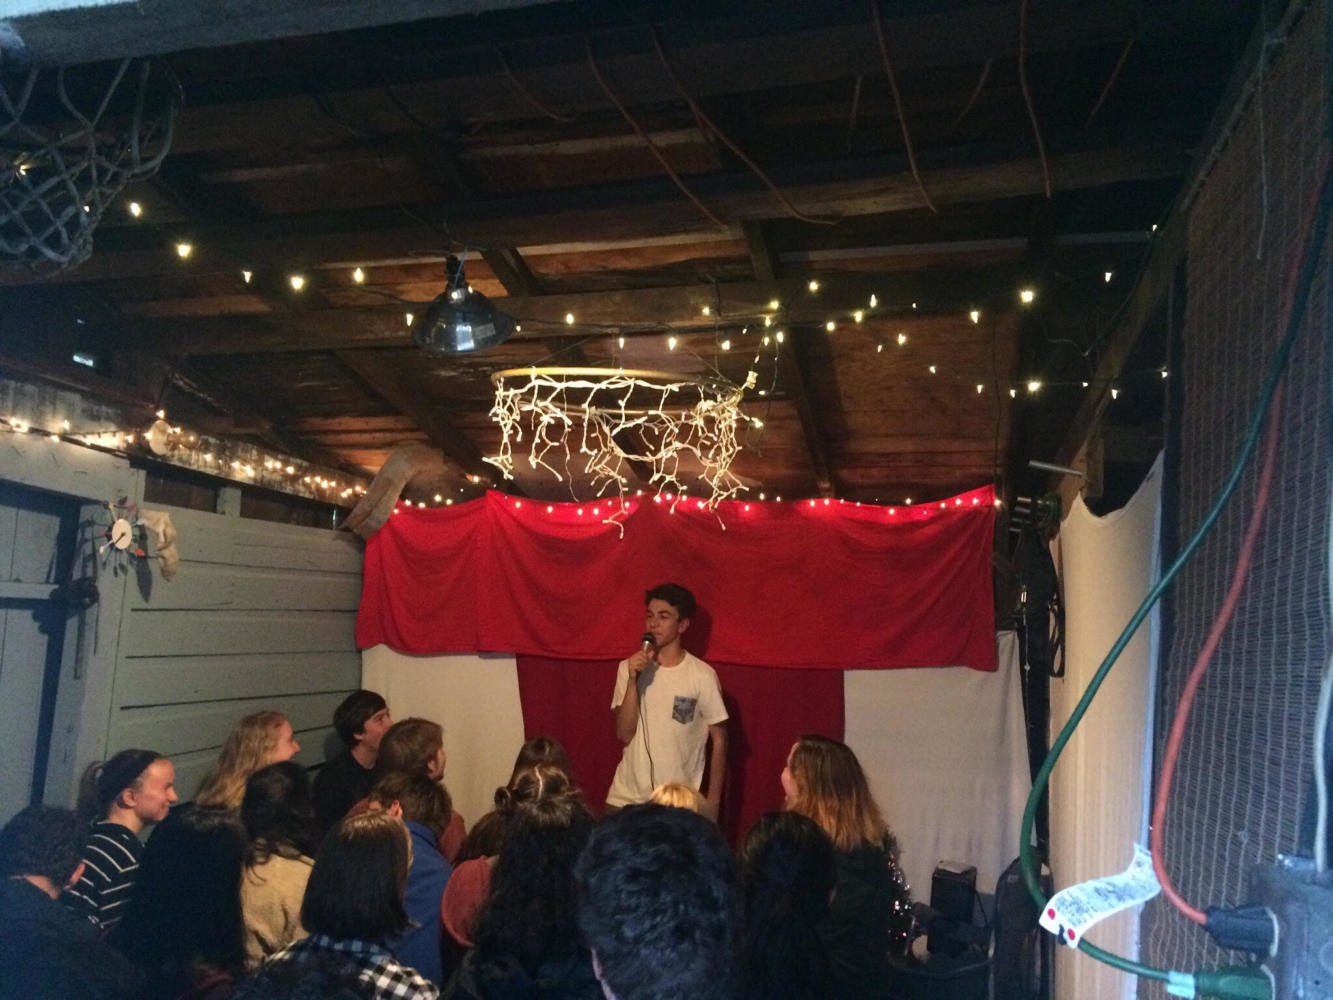 Senior Teis Jayswal performs a comedy act in his garage during Comedy Copper club, which he founded with several other seniors.